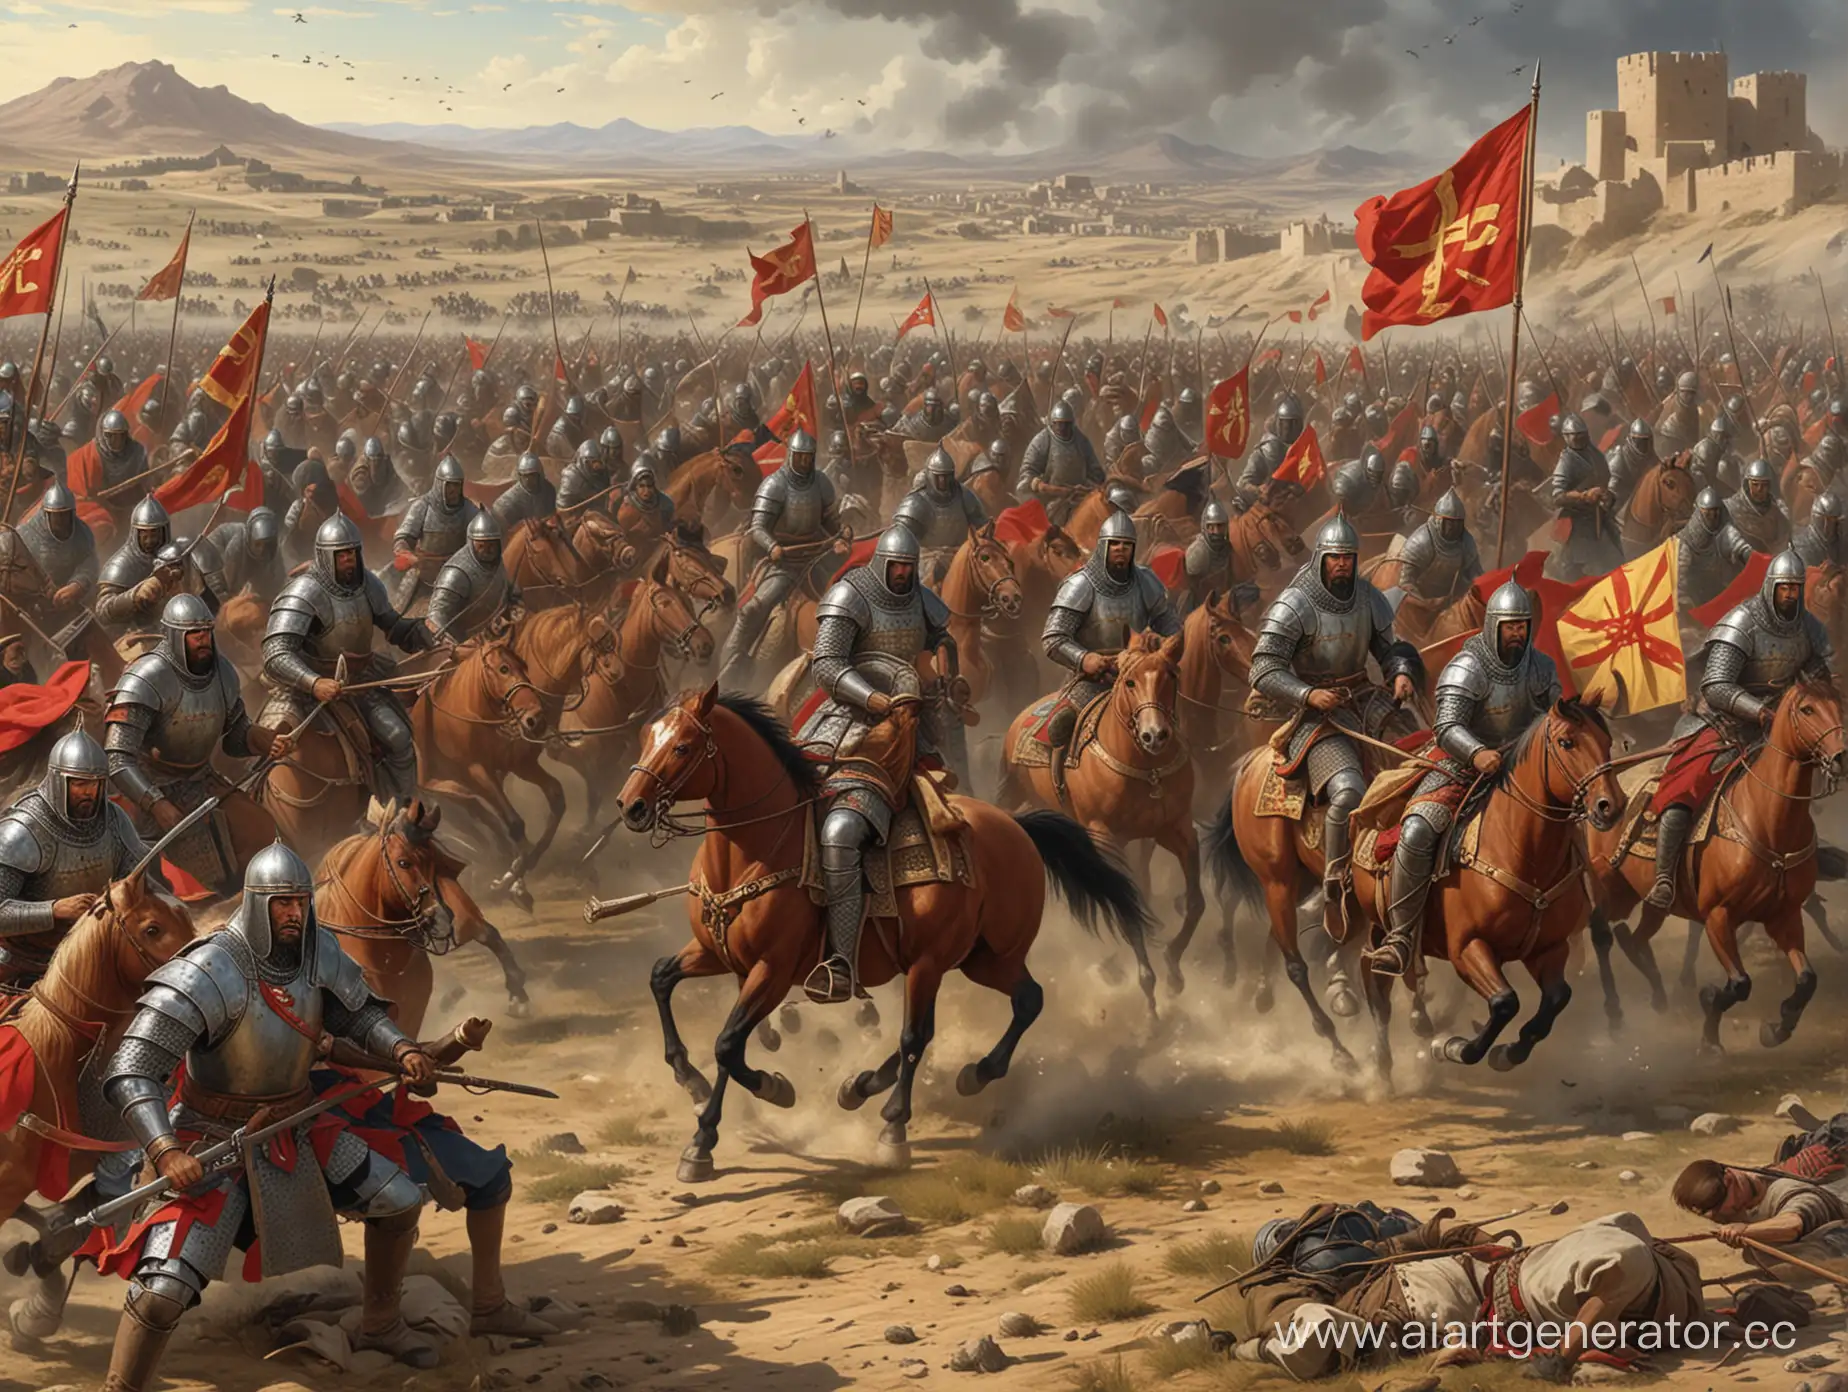 Historic-Clash-Crusaders-vs-Mongols-in-a-Catastrophic-Encounter